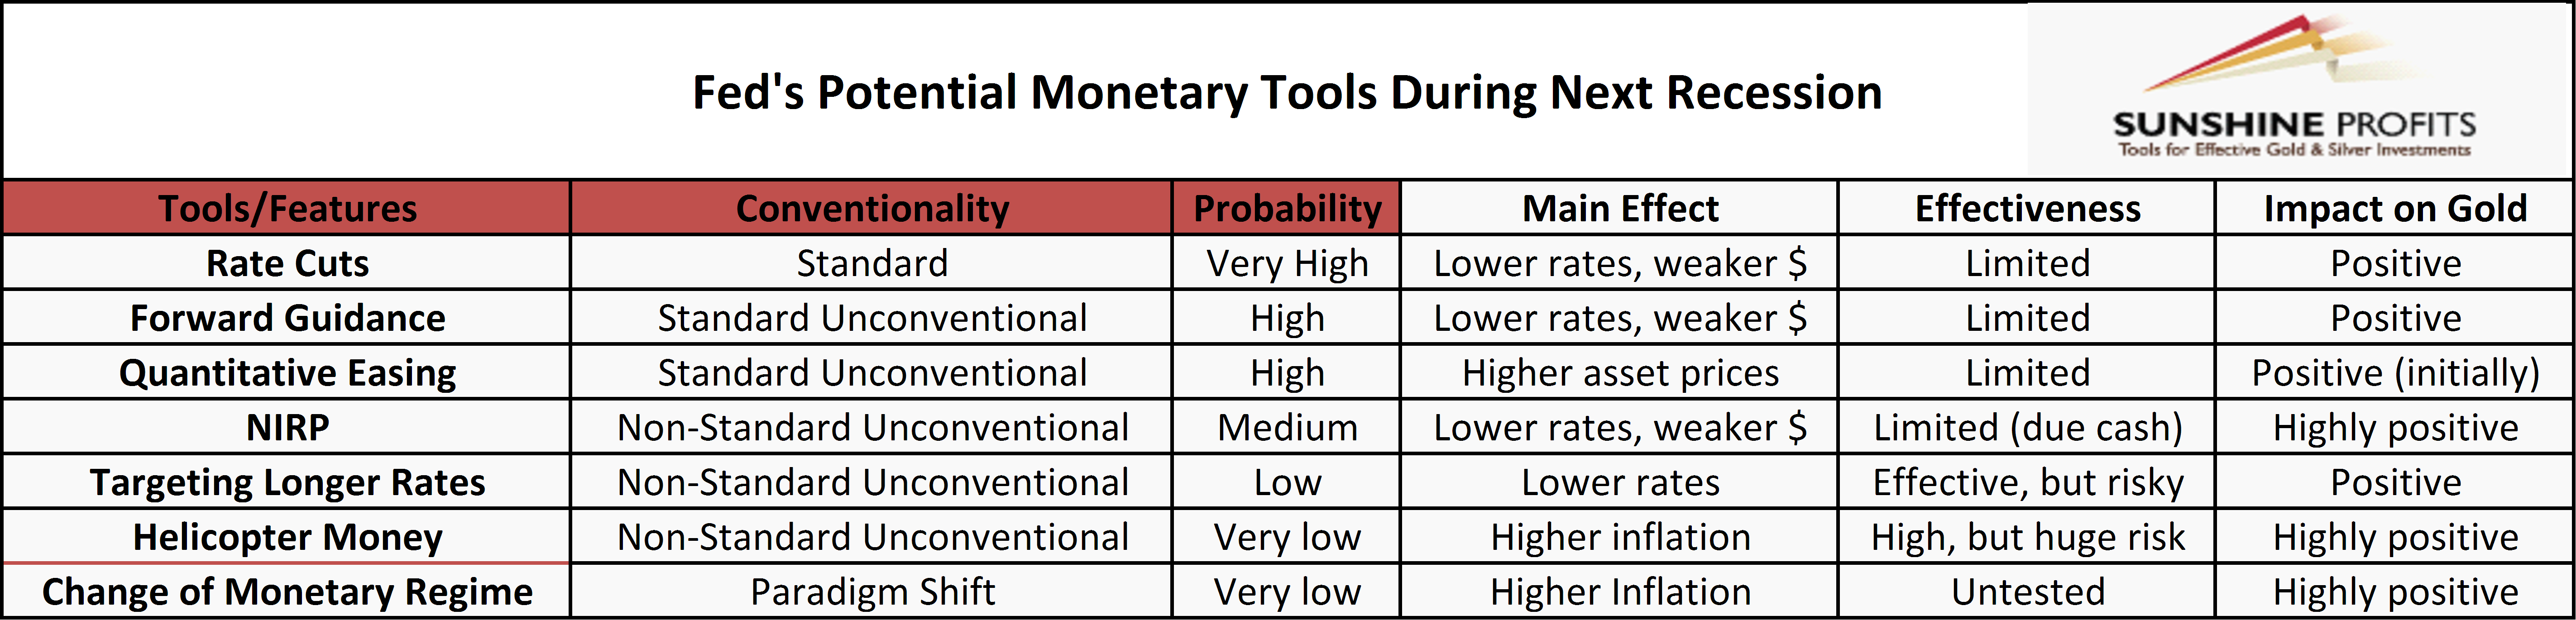 Fed’s potential monetary tools during next recession